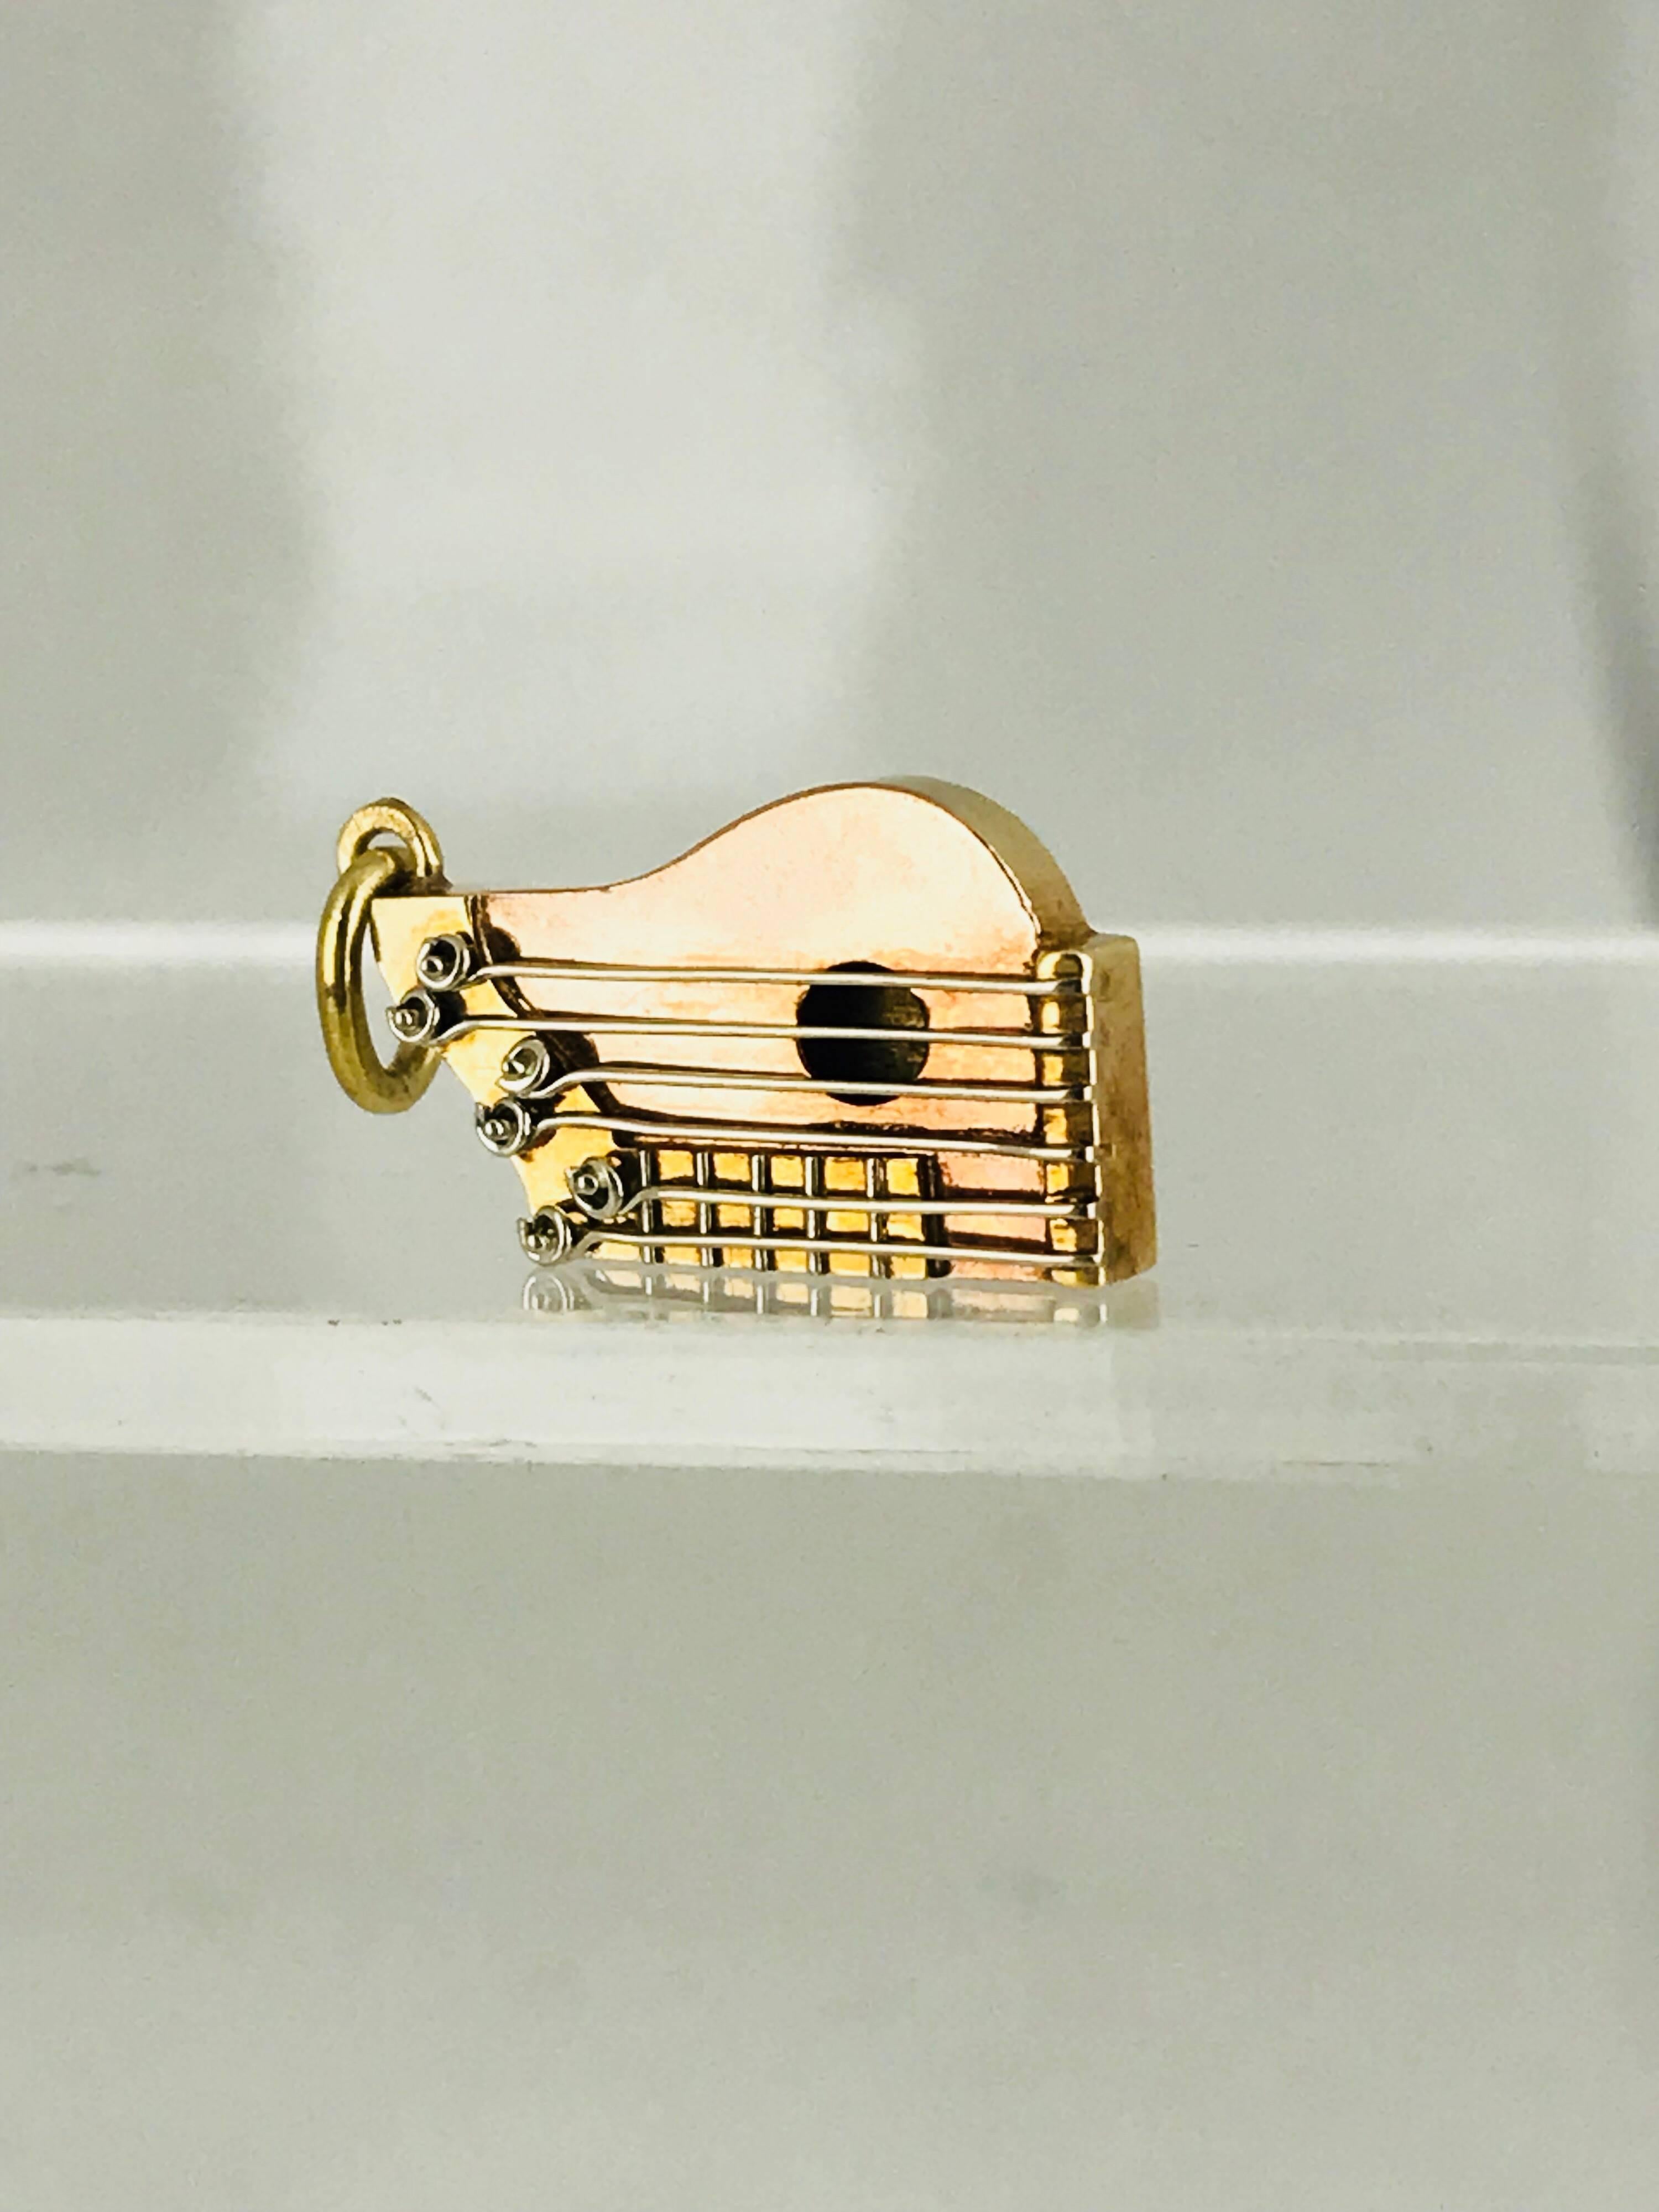 Zither Musical Instrument, Charm, 18 Karat Yellow Gold with White Strings, Rare For Sale 2